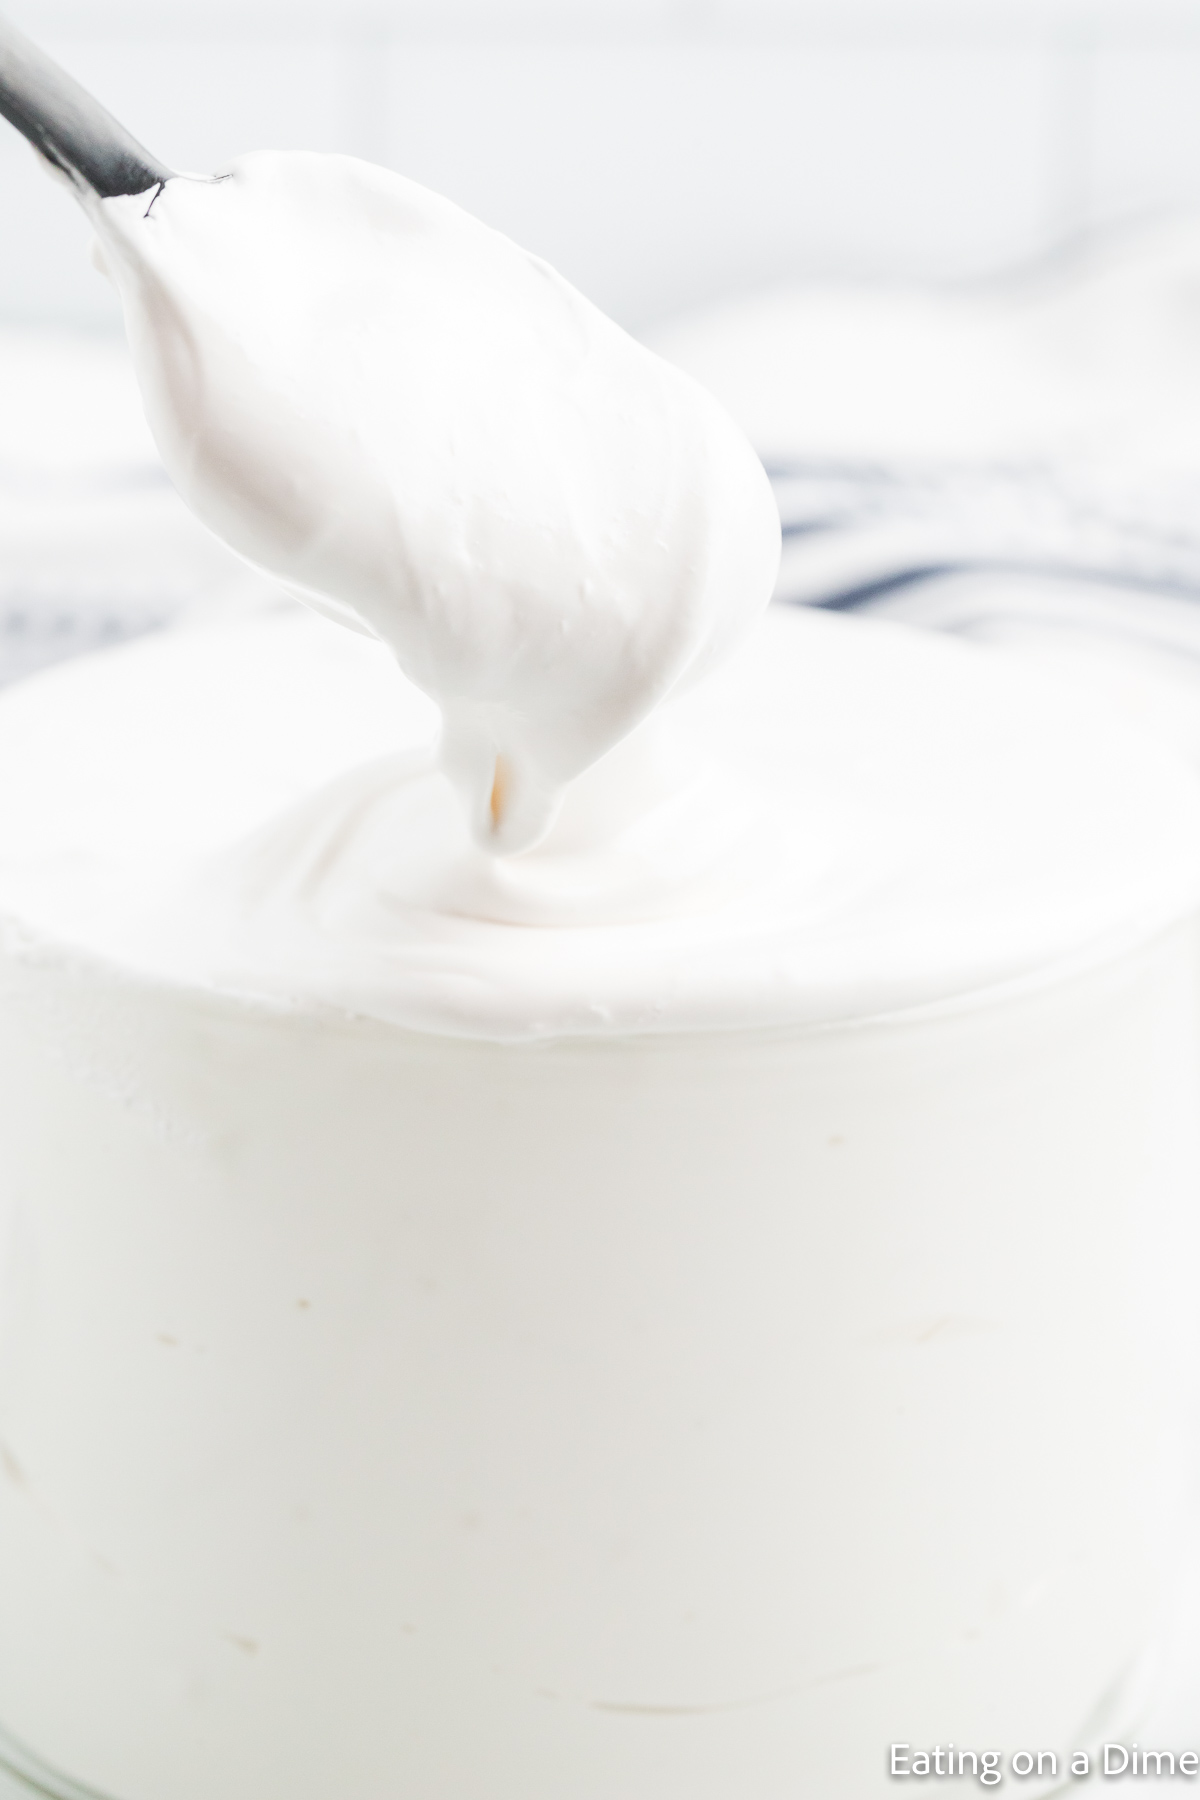 How to make marshmallow fluff without corn syrup